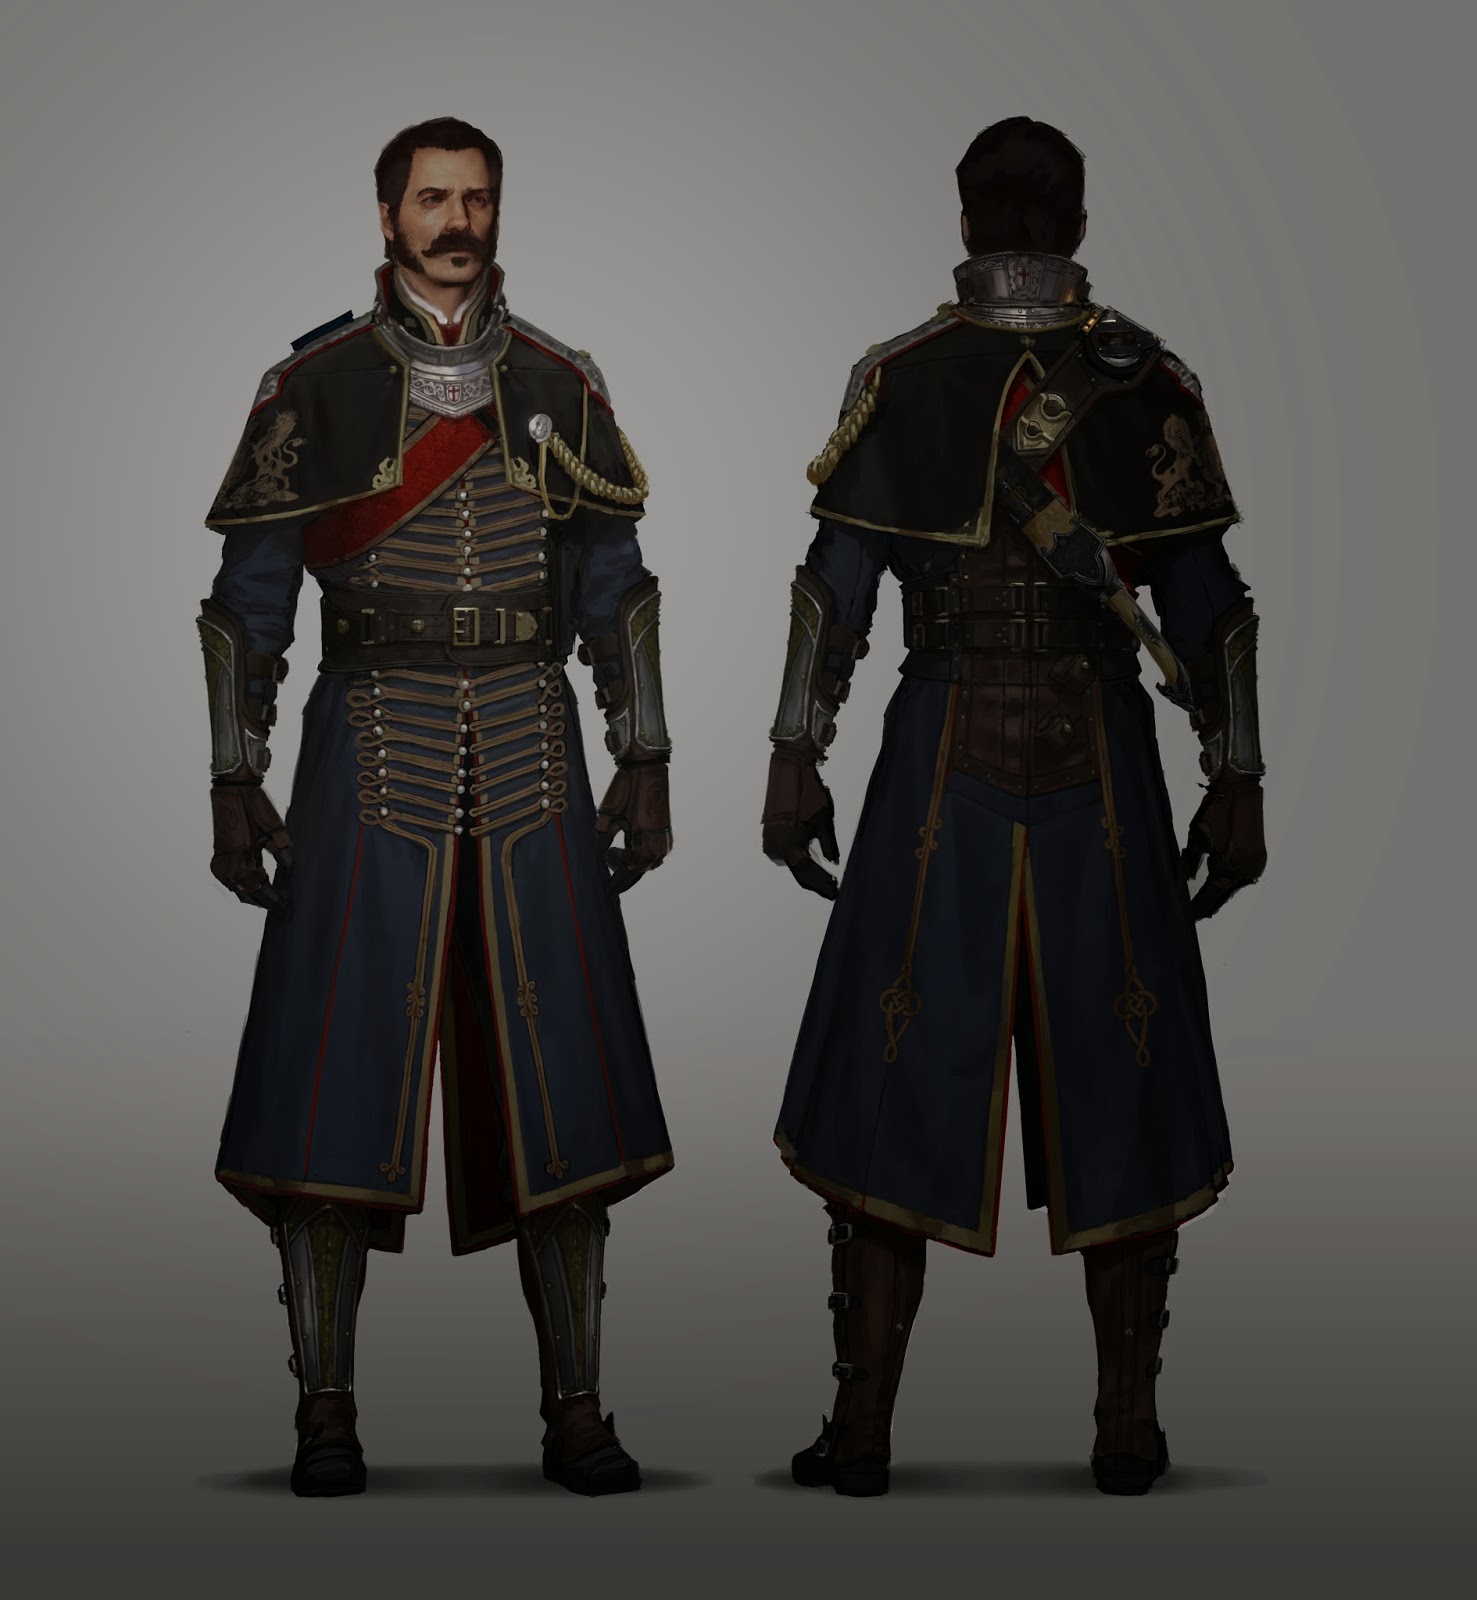 http://vignette1.wikia.nocookie.net/theorder1886/images/9/9c/The_Order_1886_Galahad.jpg/revision/20140219140402